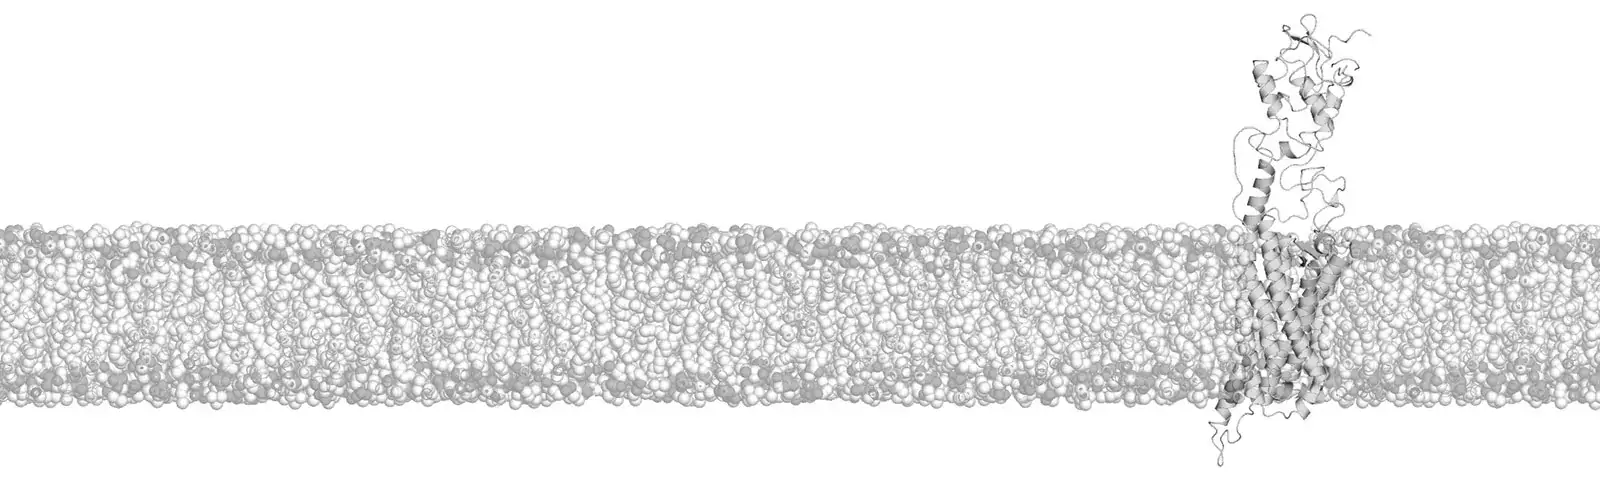 membrane-figure for the startpage of research group schulte lab